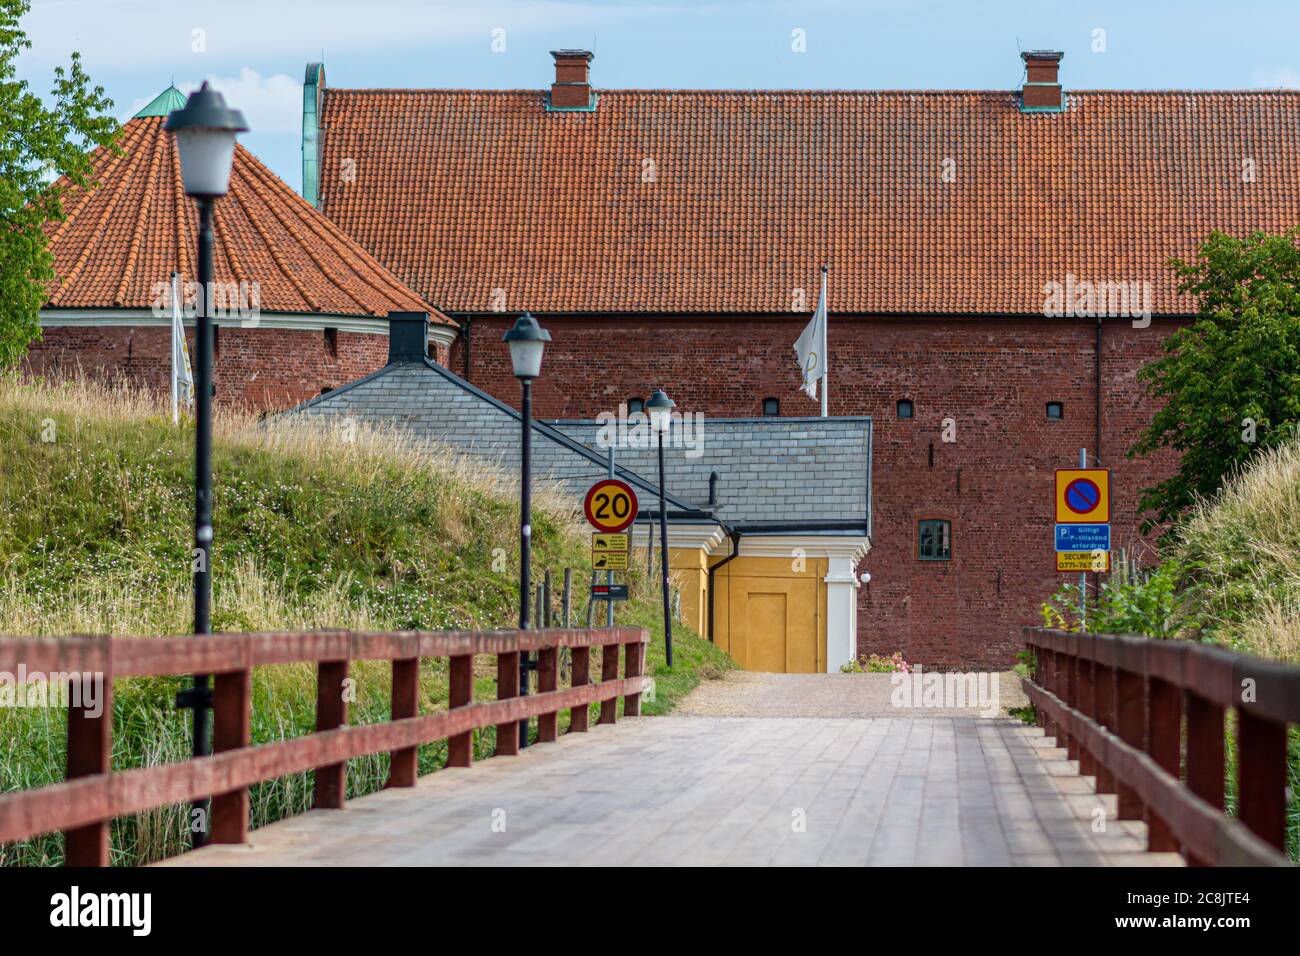 The bridge crossing the moat protecting an old castle in Landskrona, southern Sweden. The castle was initially built by Christian III of Denmark 1549–1559 as a fortification with two complete moats Stock Photo